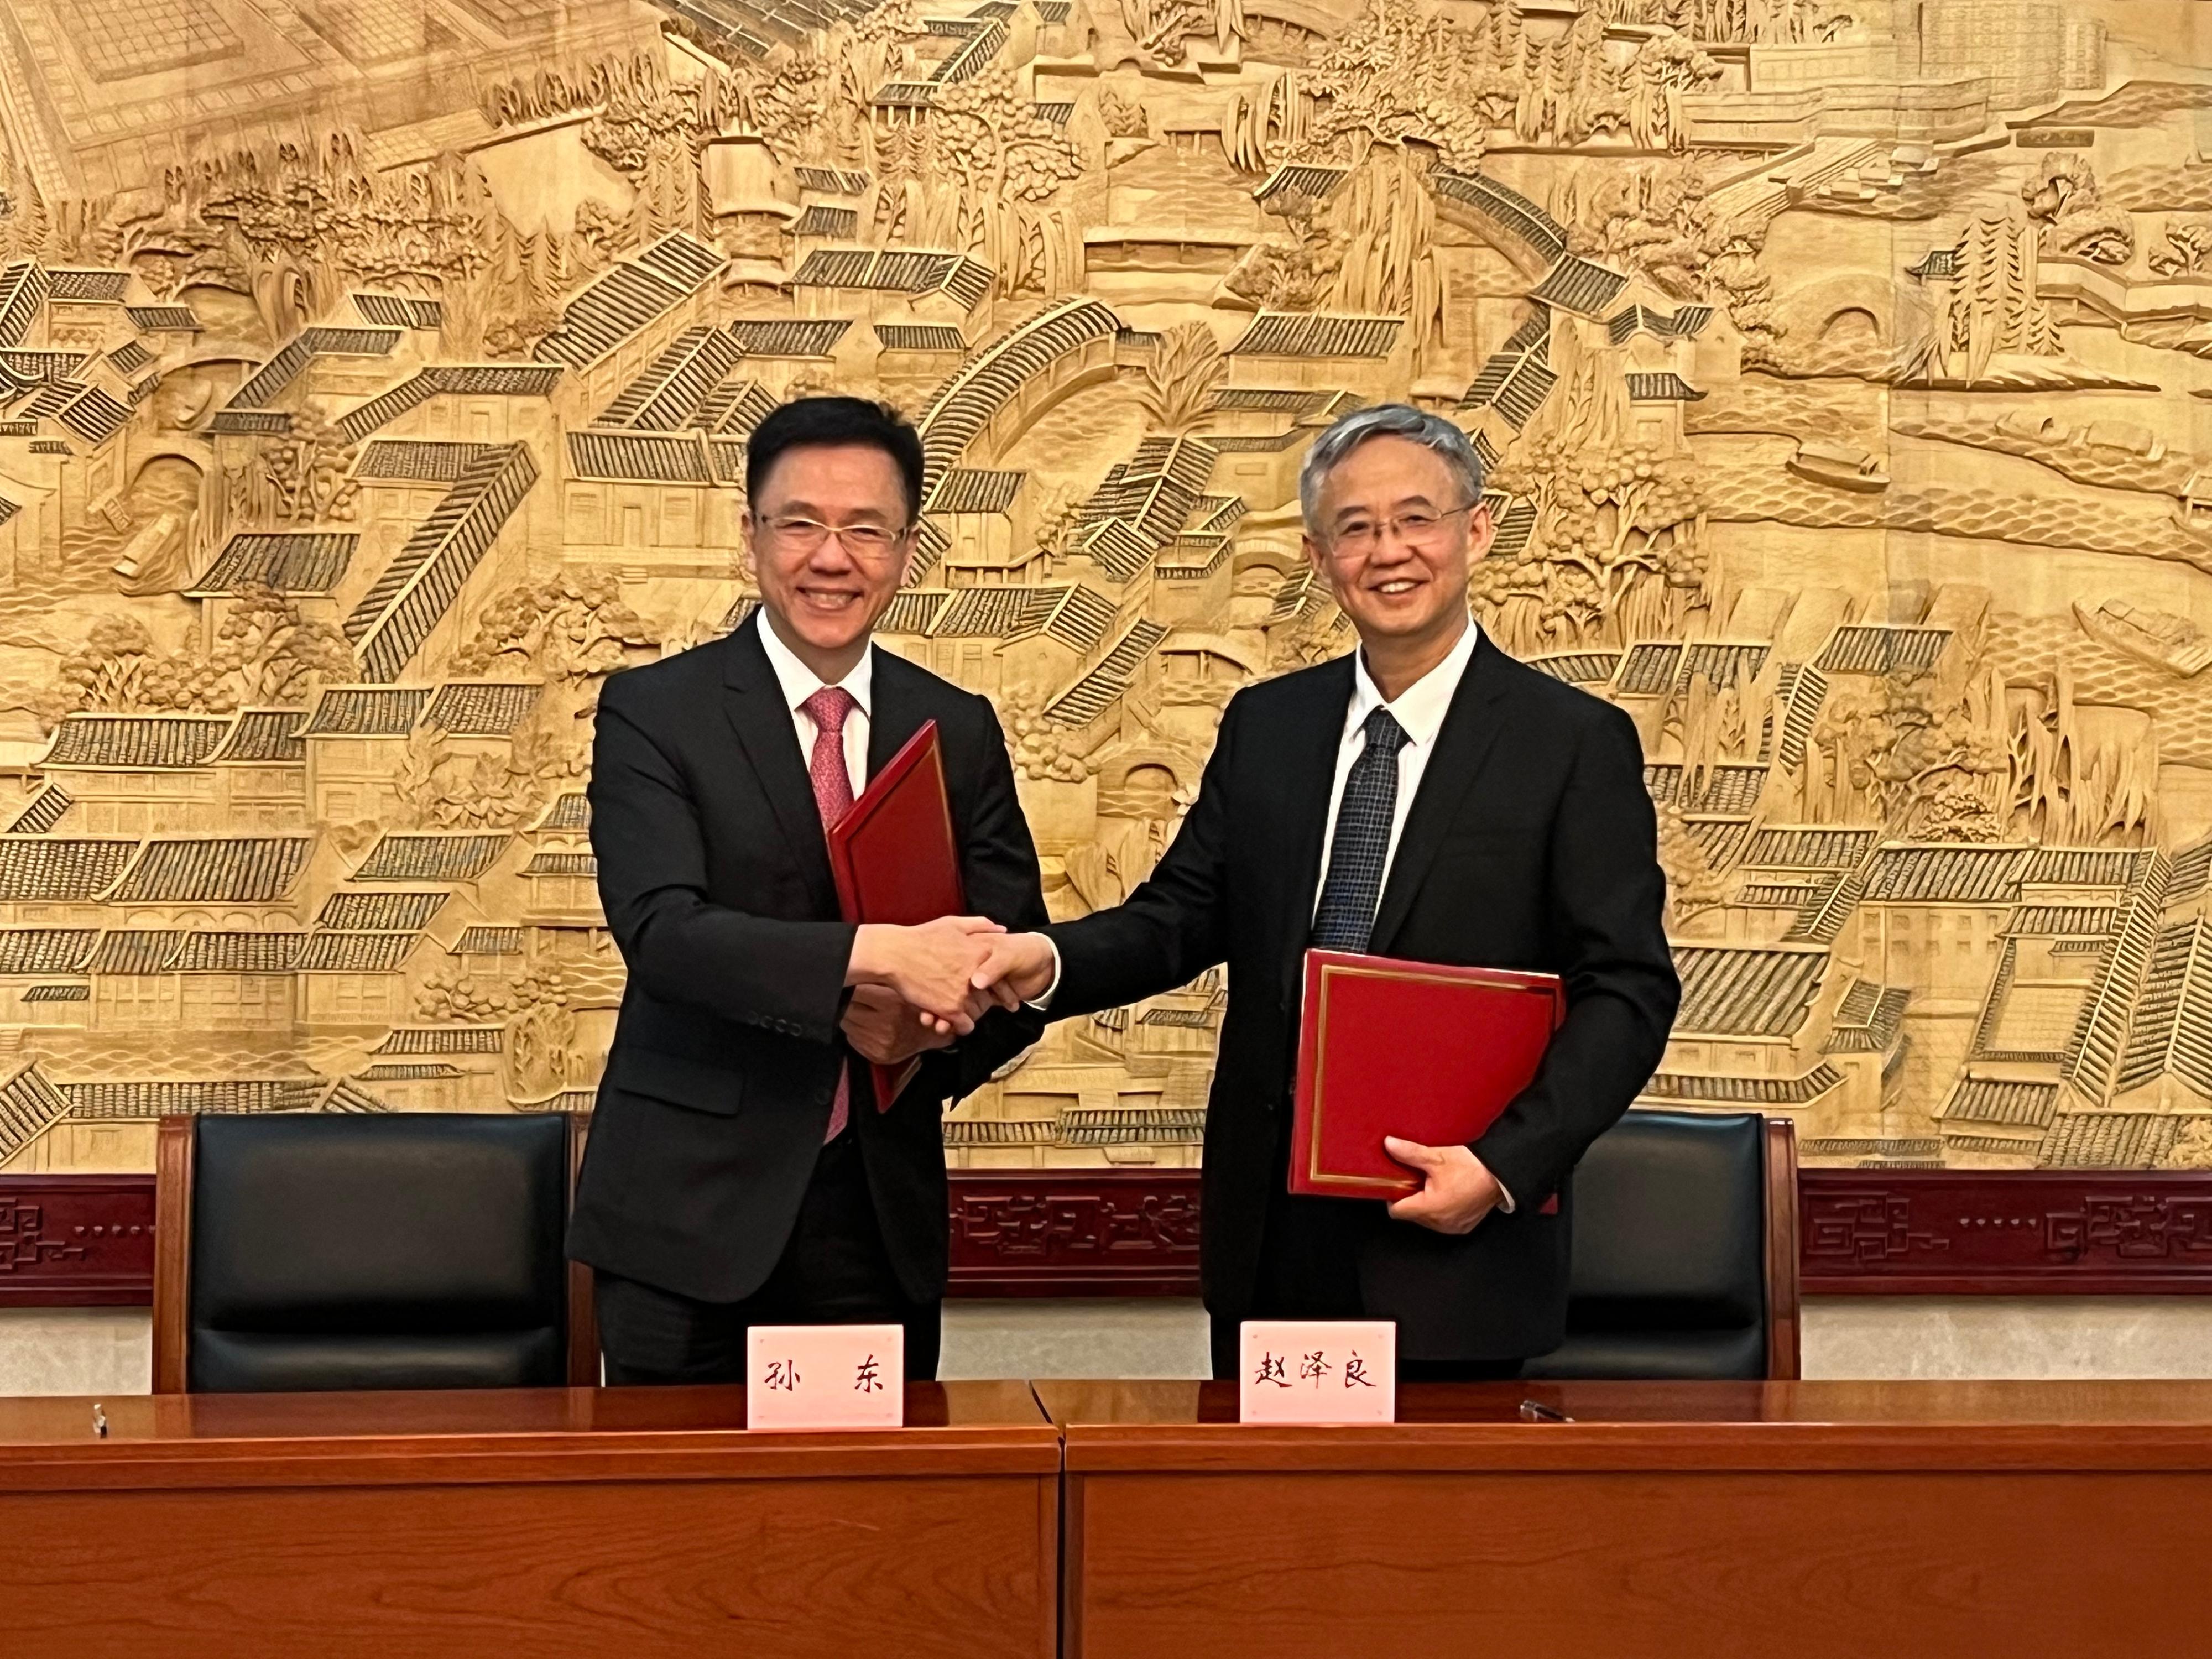 The Secretary for Innovation, Technology and Industry, Professor Sun Dong (left), and Deputy Director of the Cyberspace Administration of China Mr Zhao Zeliang (right), were pictured after the signing of the Memorandum of Understanding on Facilitating Cross-boundary Data Flow Within the Guangdong-Hong Kong-Macao Greater Bay Area in Beijing yesterday (June 29).